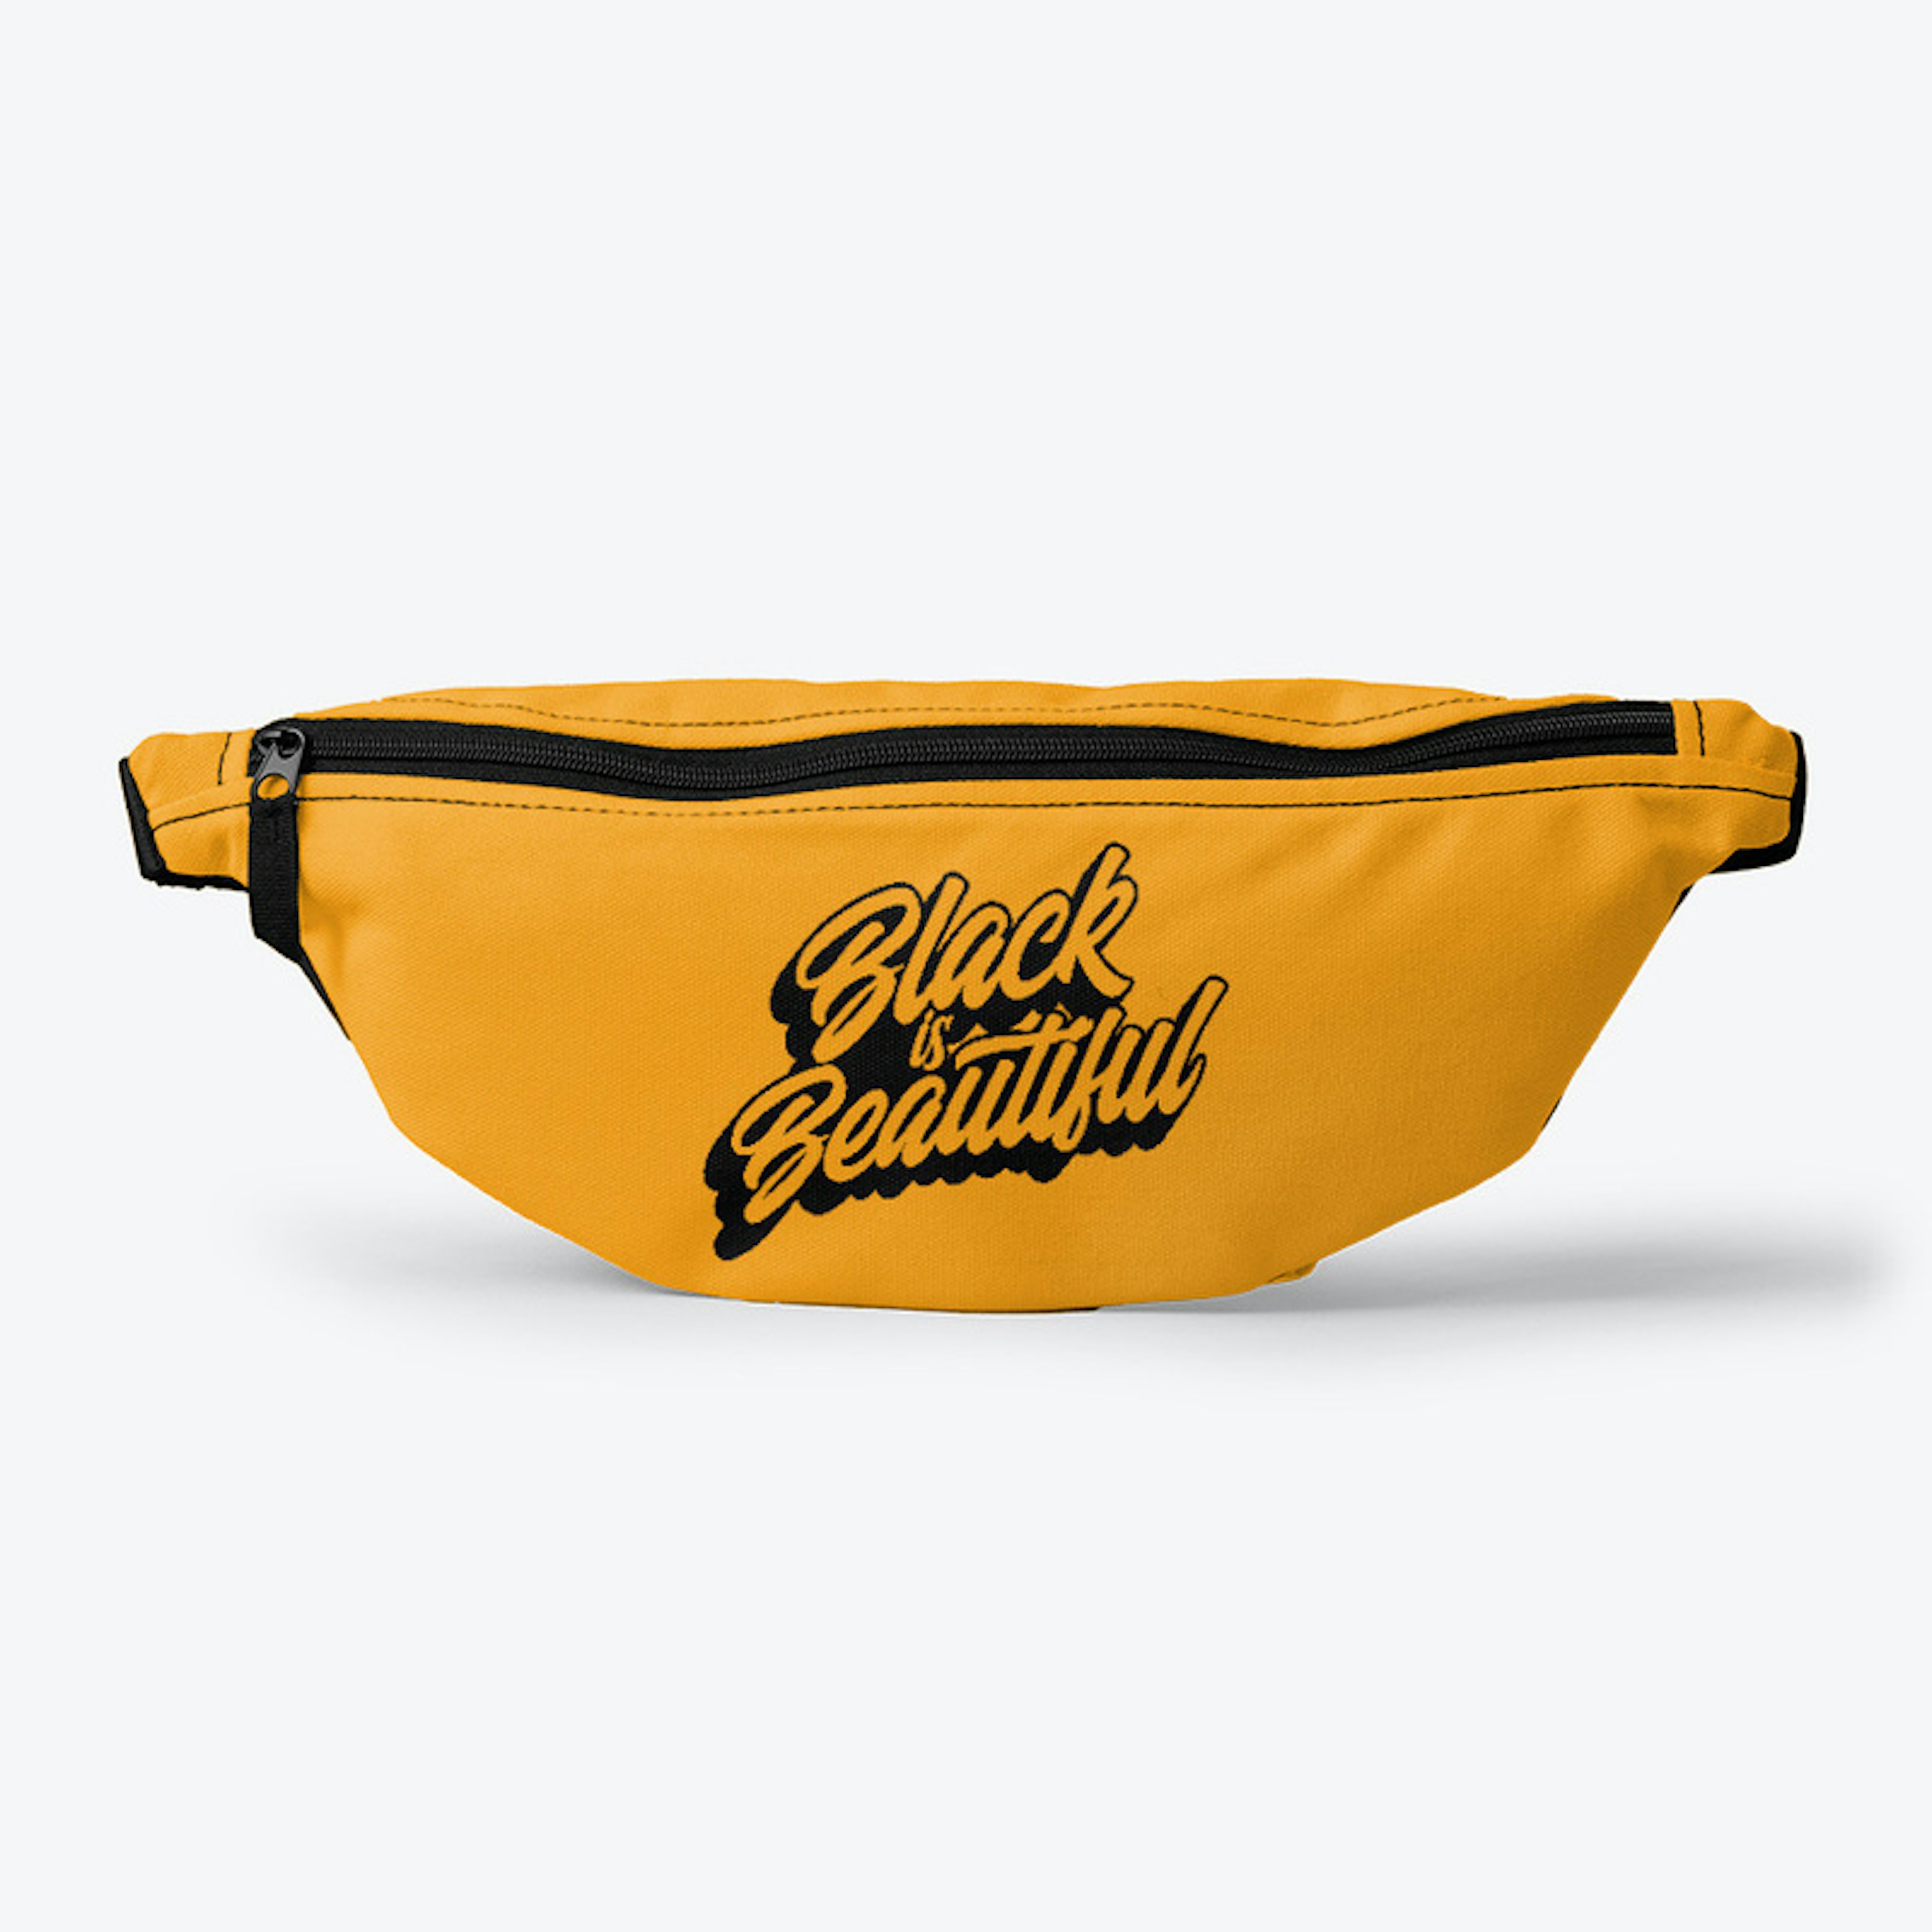 Black Is Beautiful Tees, Totes, and More